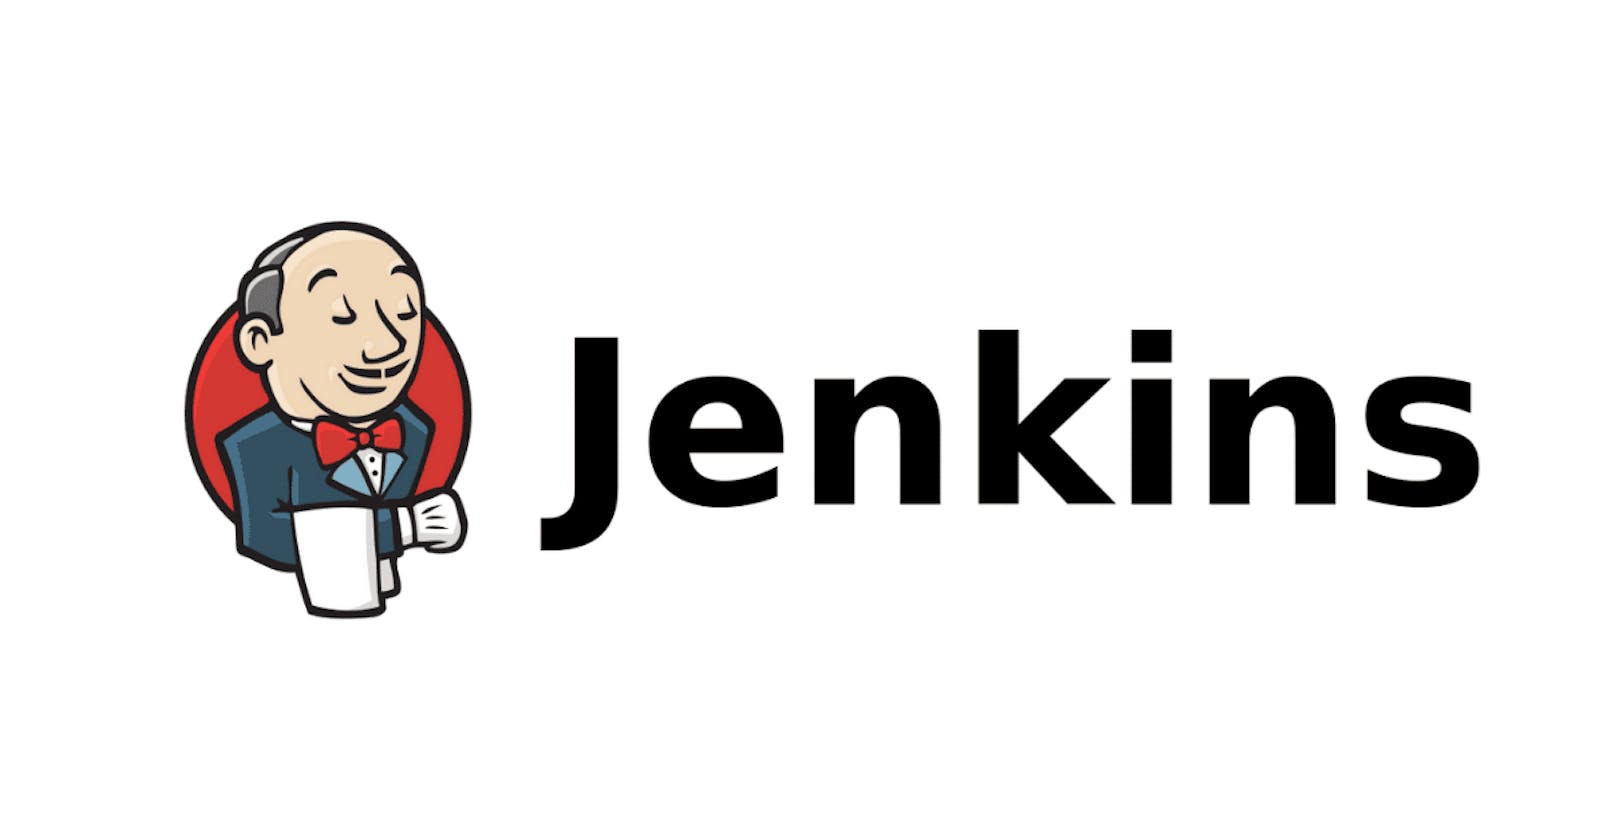 Jenkins - Enabling Continuous Integration and Delivery in DevOps